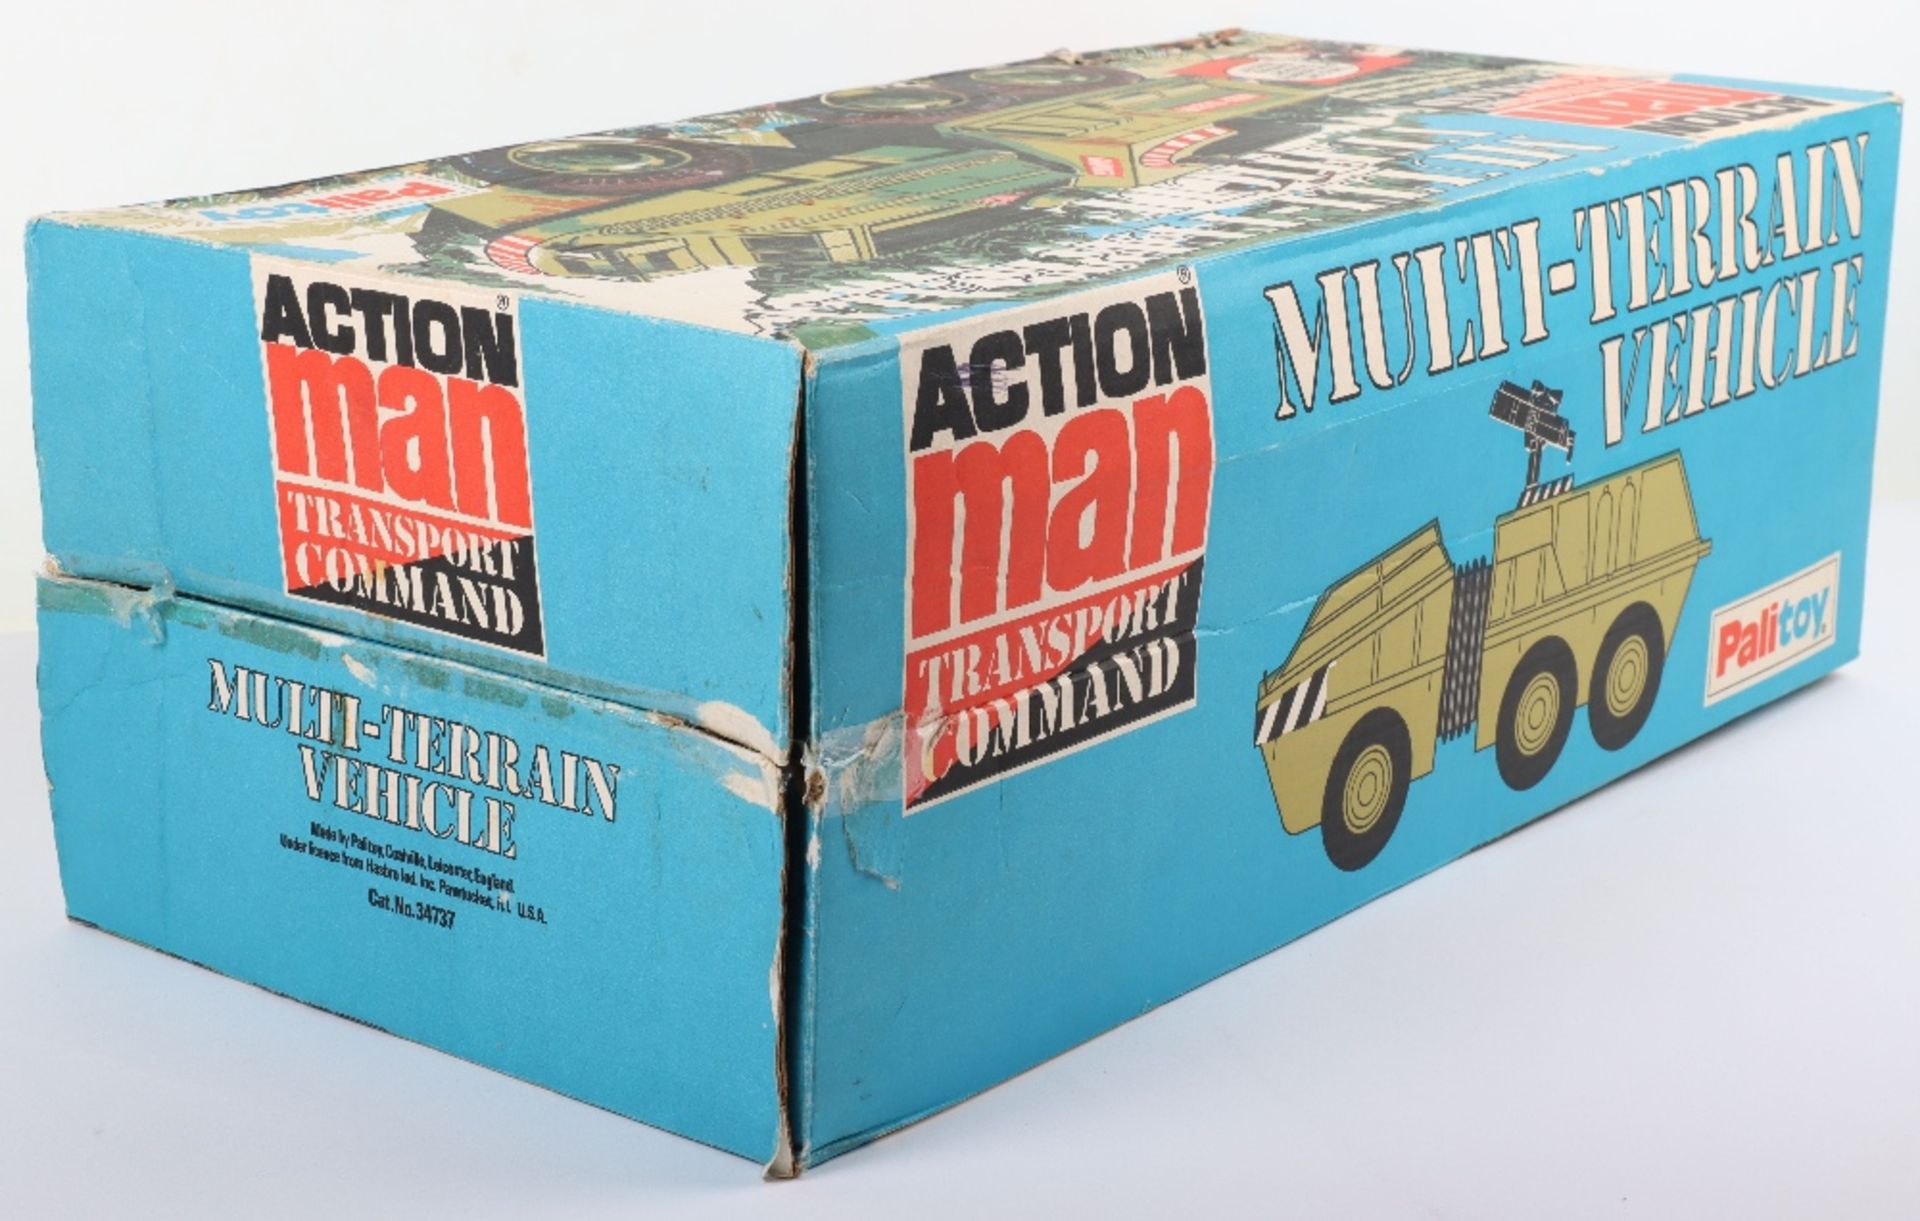 Boxed Original Palitoy Action Man Transport Command Multi-Terrain Vehicle - Image 2 of 9